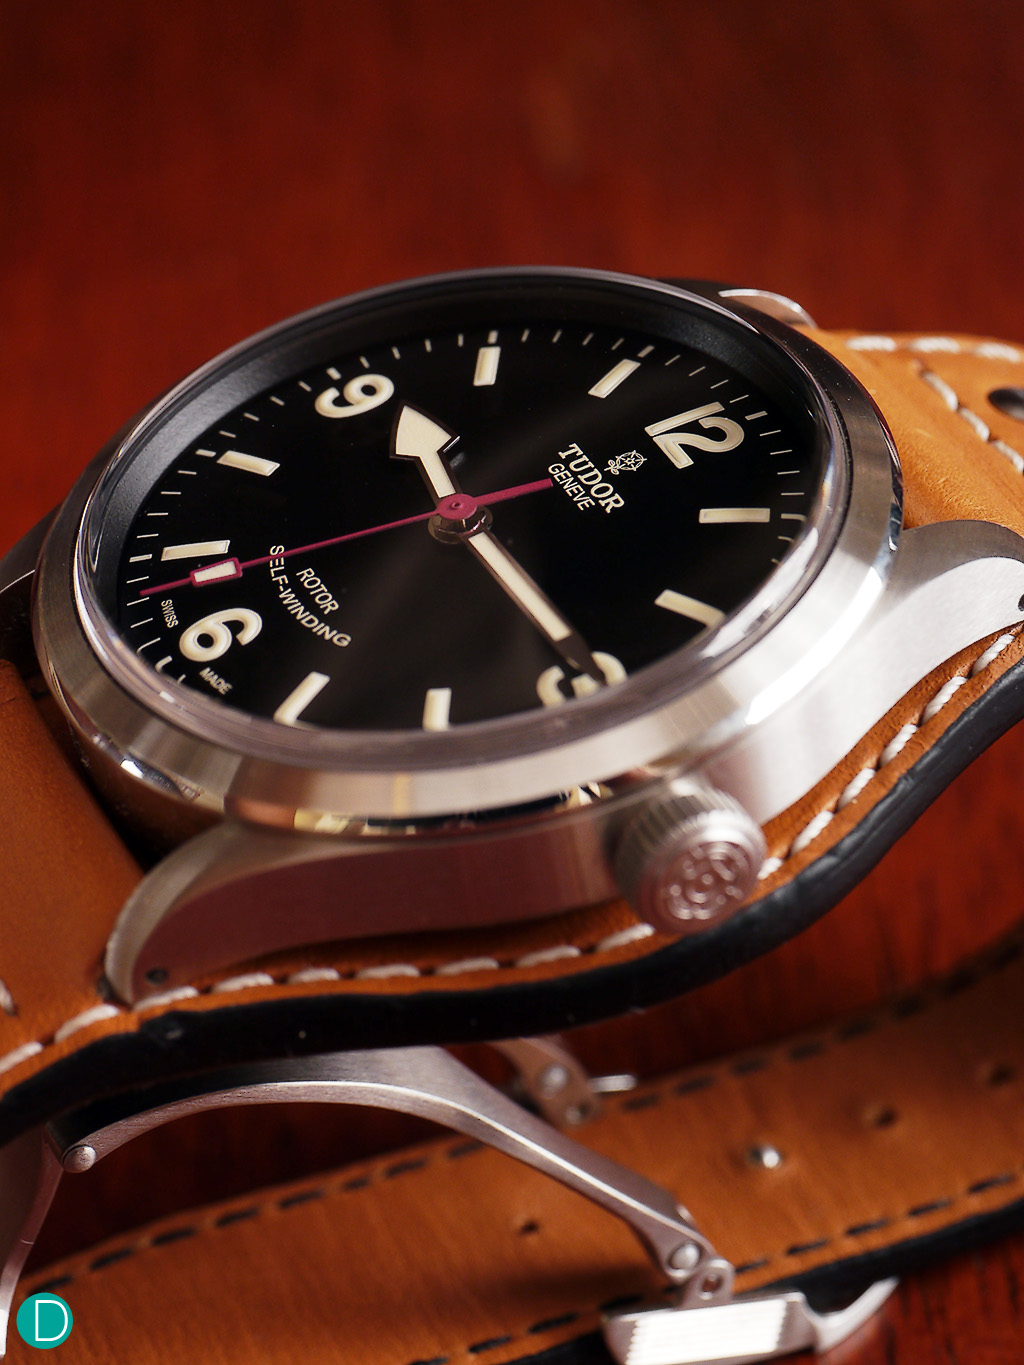 To be honest, the Tudor Heritage Ranger is a handsome timepiece. A classic design, with modern technologies. 